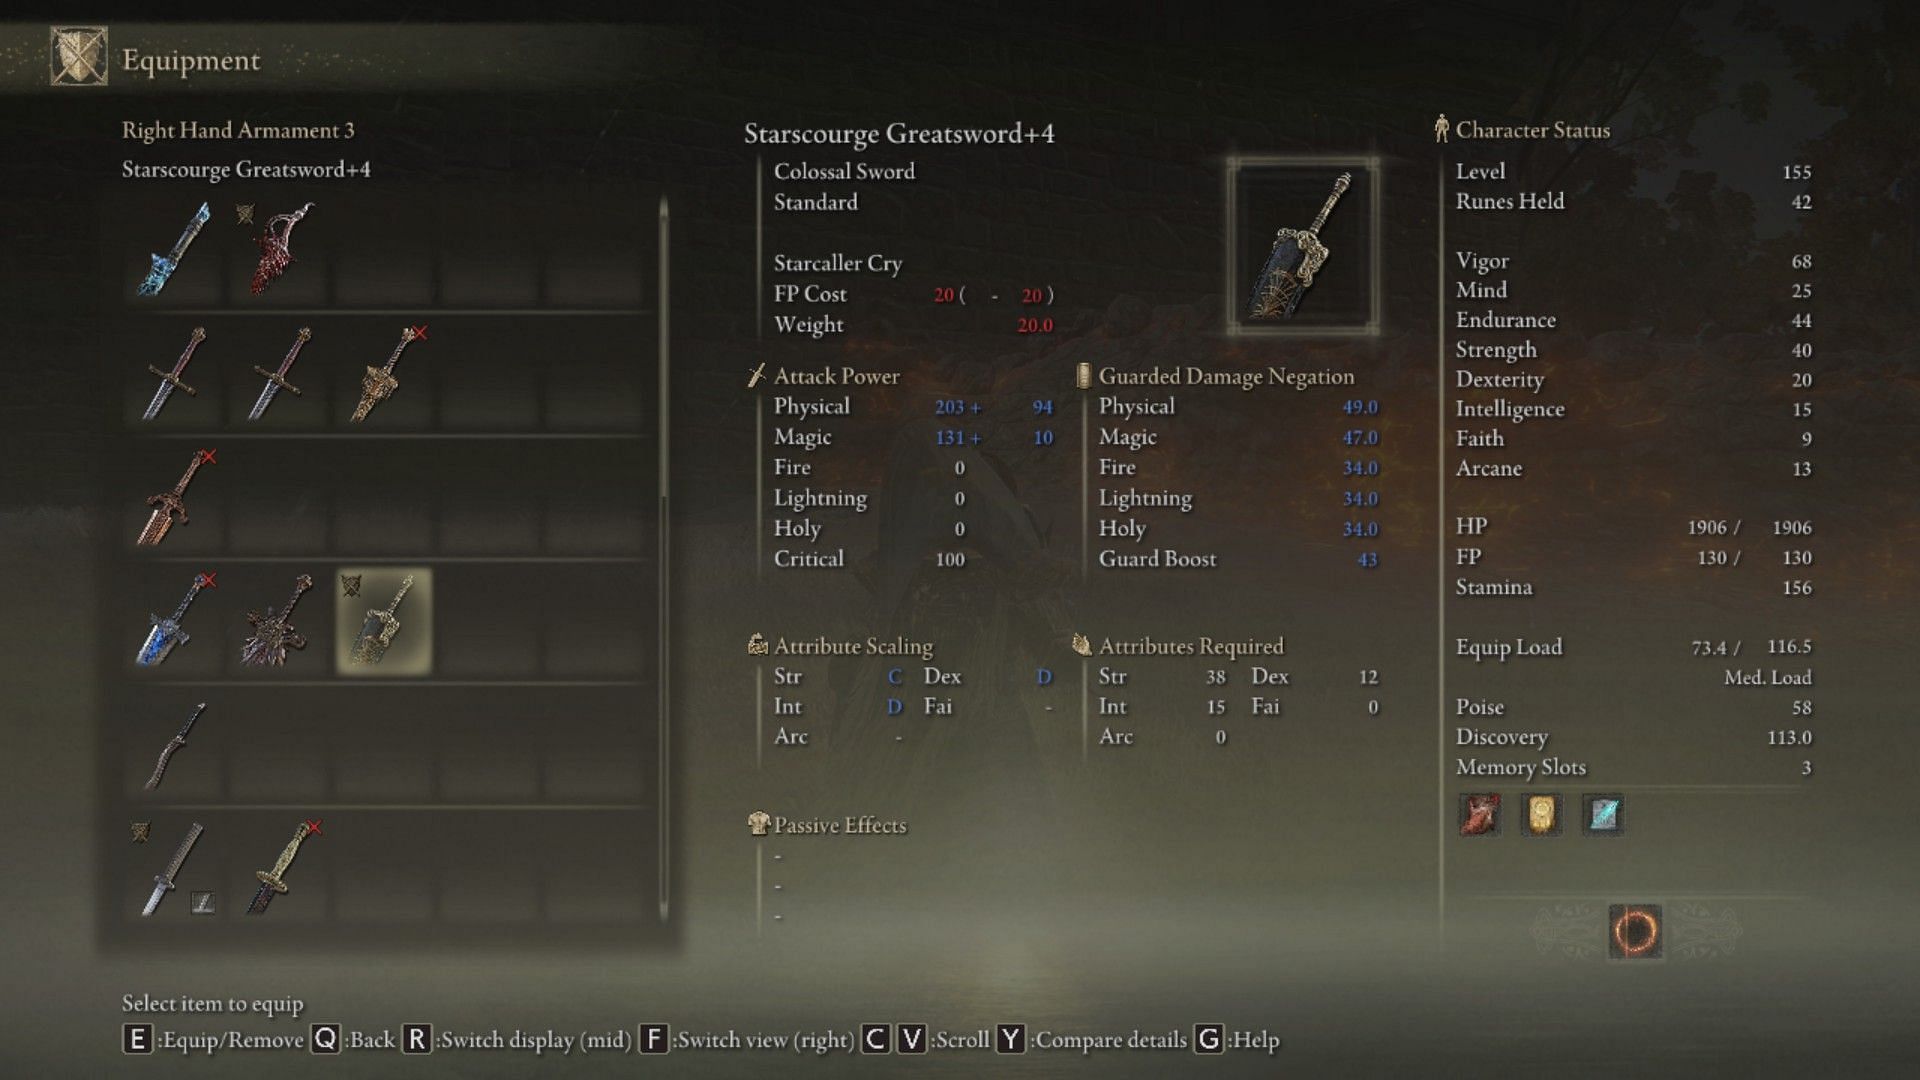 The Starscourge Greatsword is an all round weapon that is quite good for boss DPS (Image via Elden Ring)